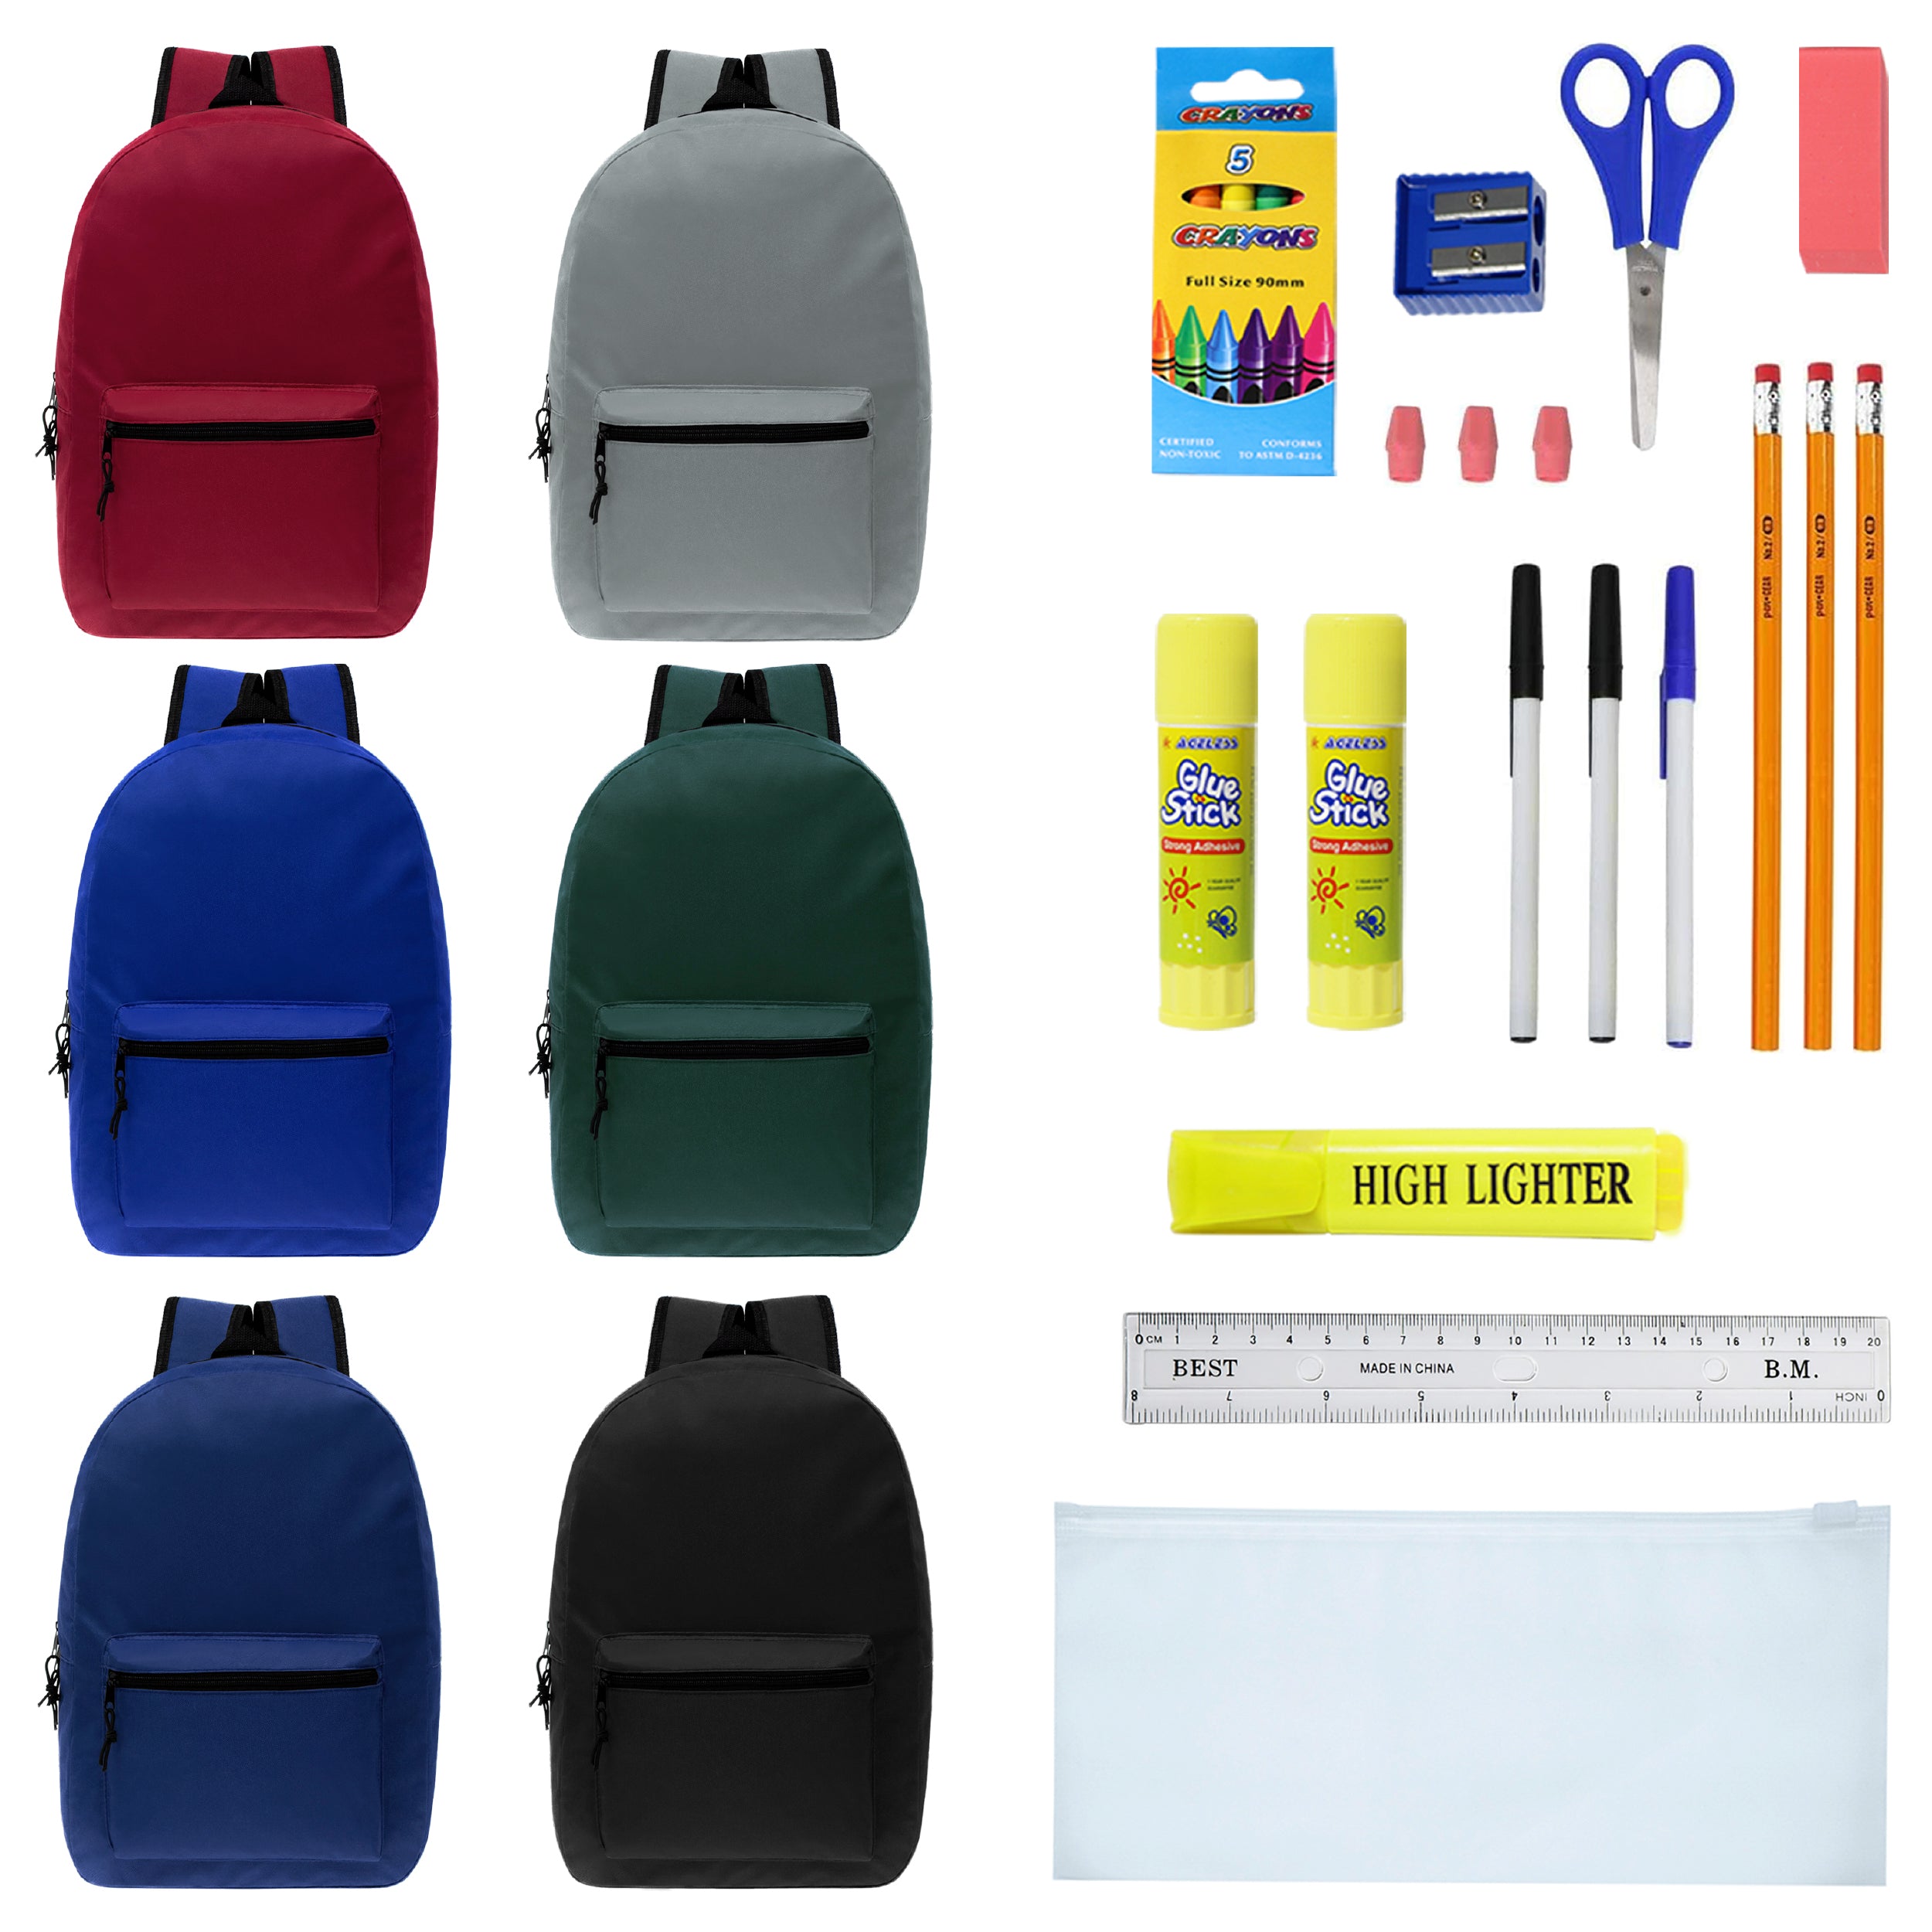 15 Inch Bulk Backpacks in Assorted Colors with School Supply Kits Wholesale - Case of 12